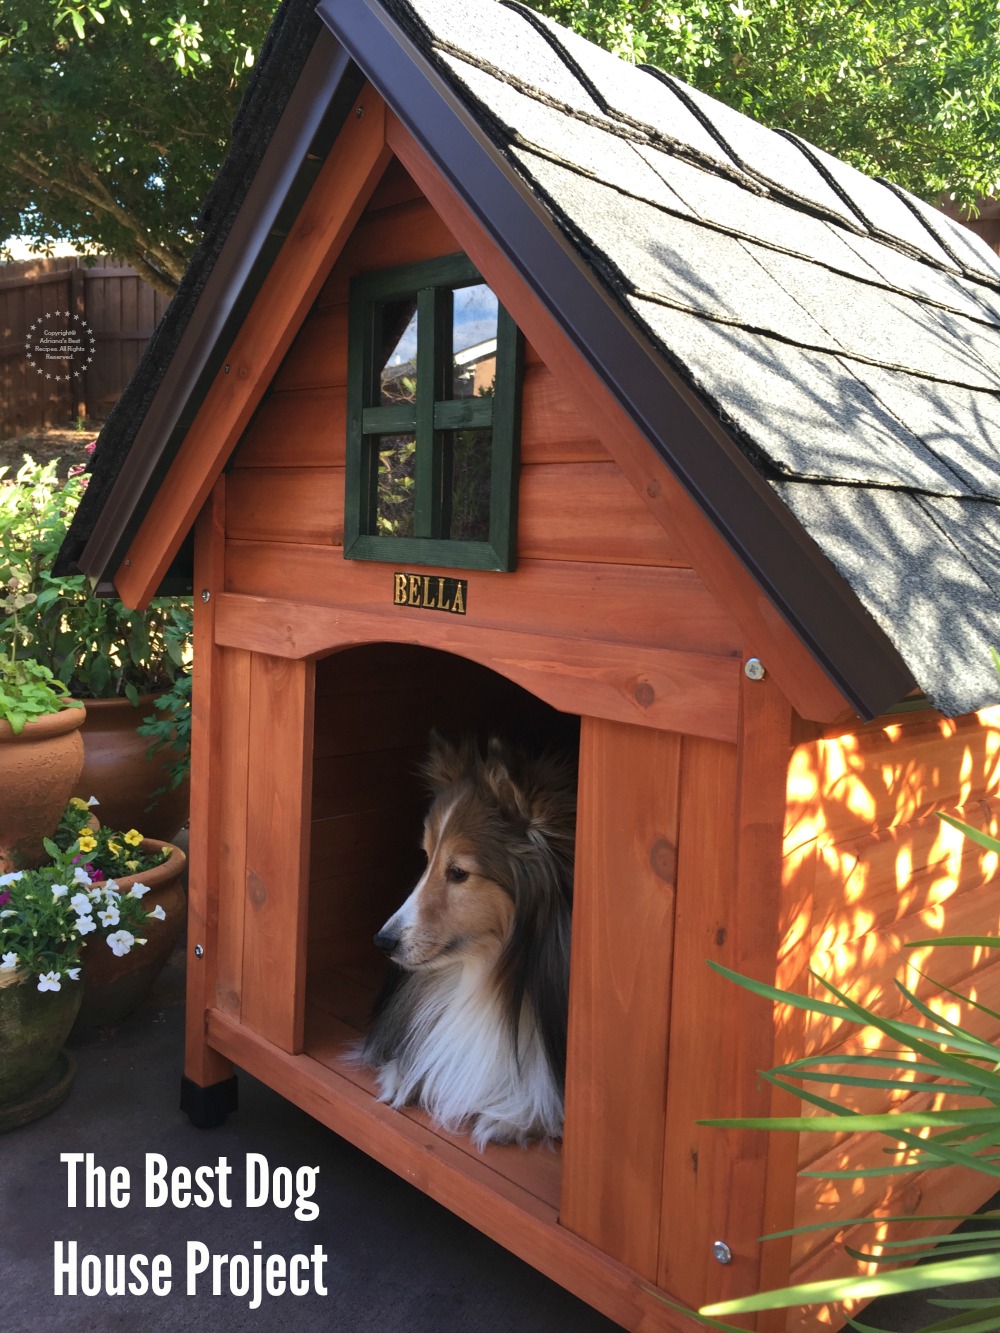 The best dog house project using high quality materials such as shingles and cedar wood. 